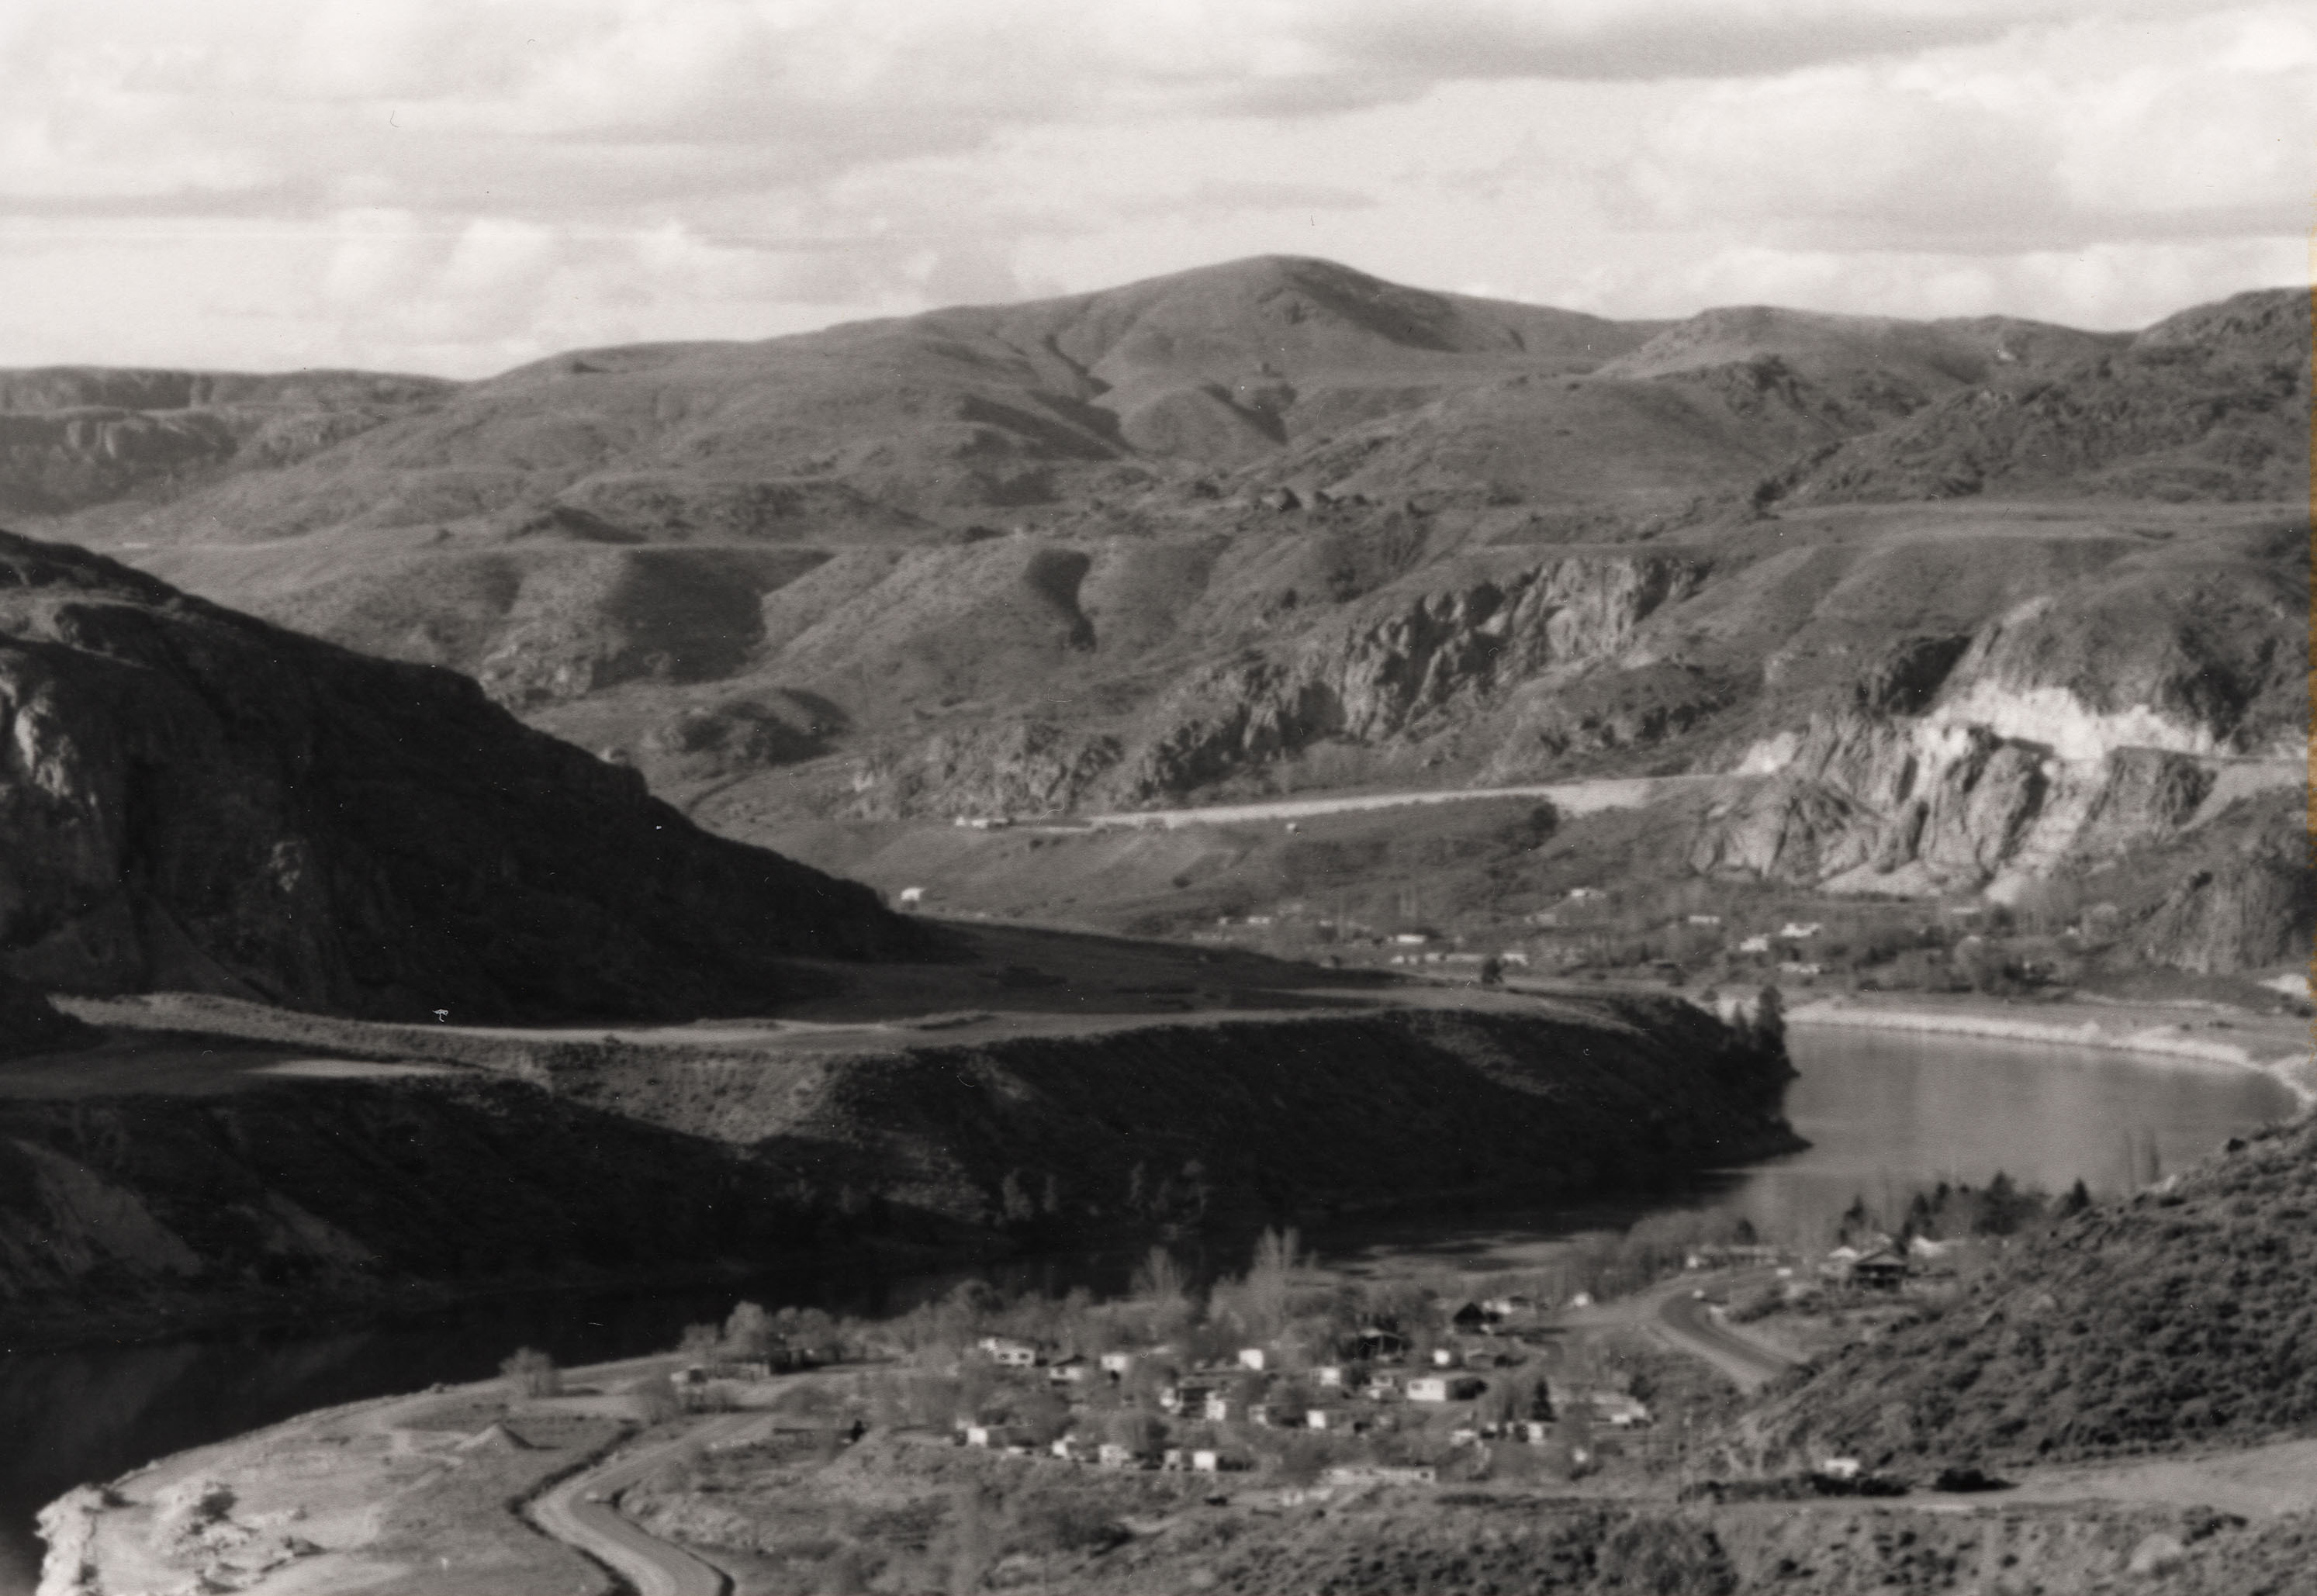 Black and white photograph of small town next to a river bend with bare mountains rising in the background